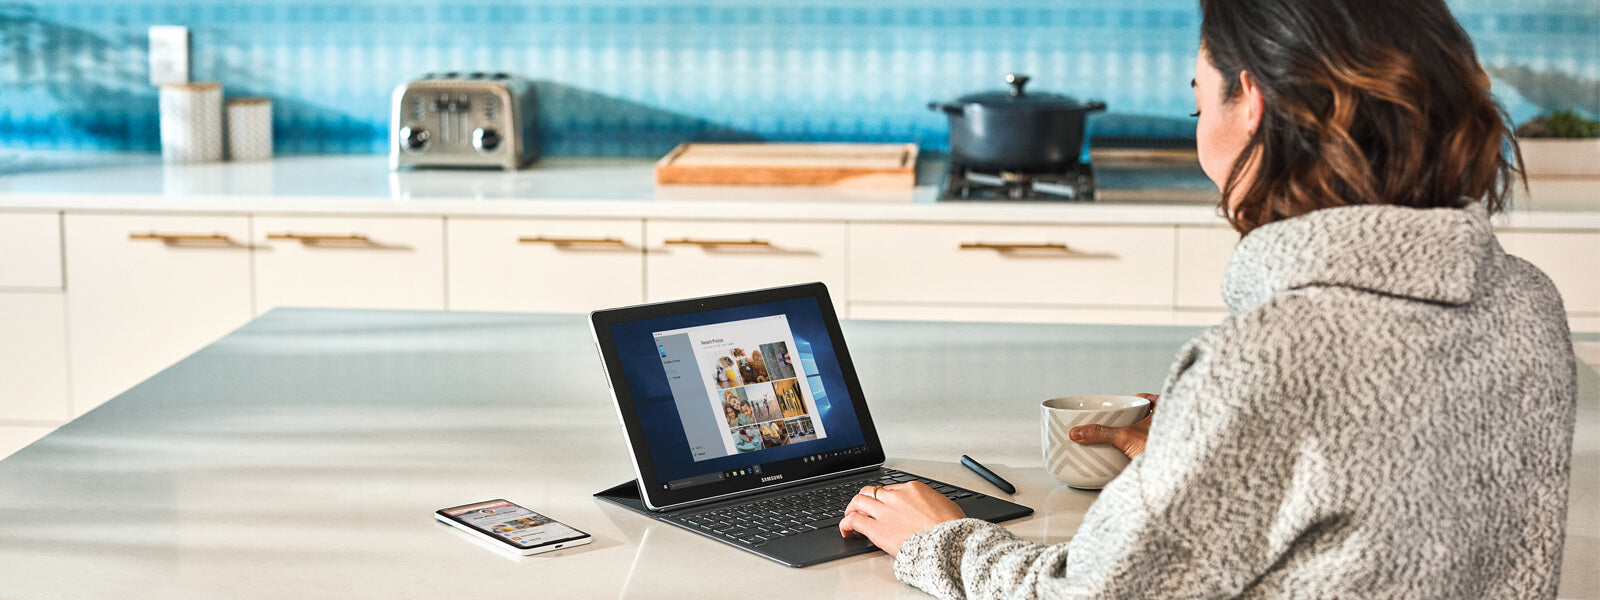 Microsoft Windows 10 Personal Tips and Tricks